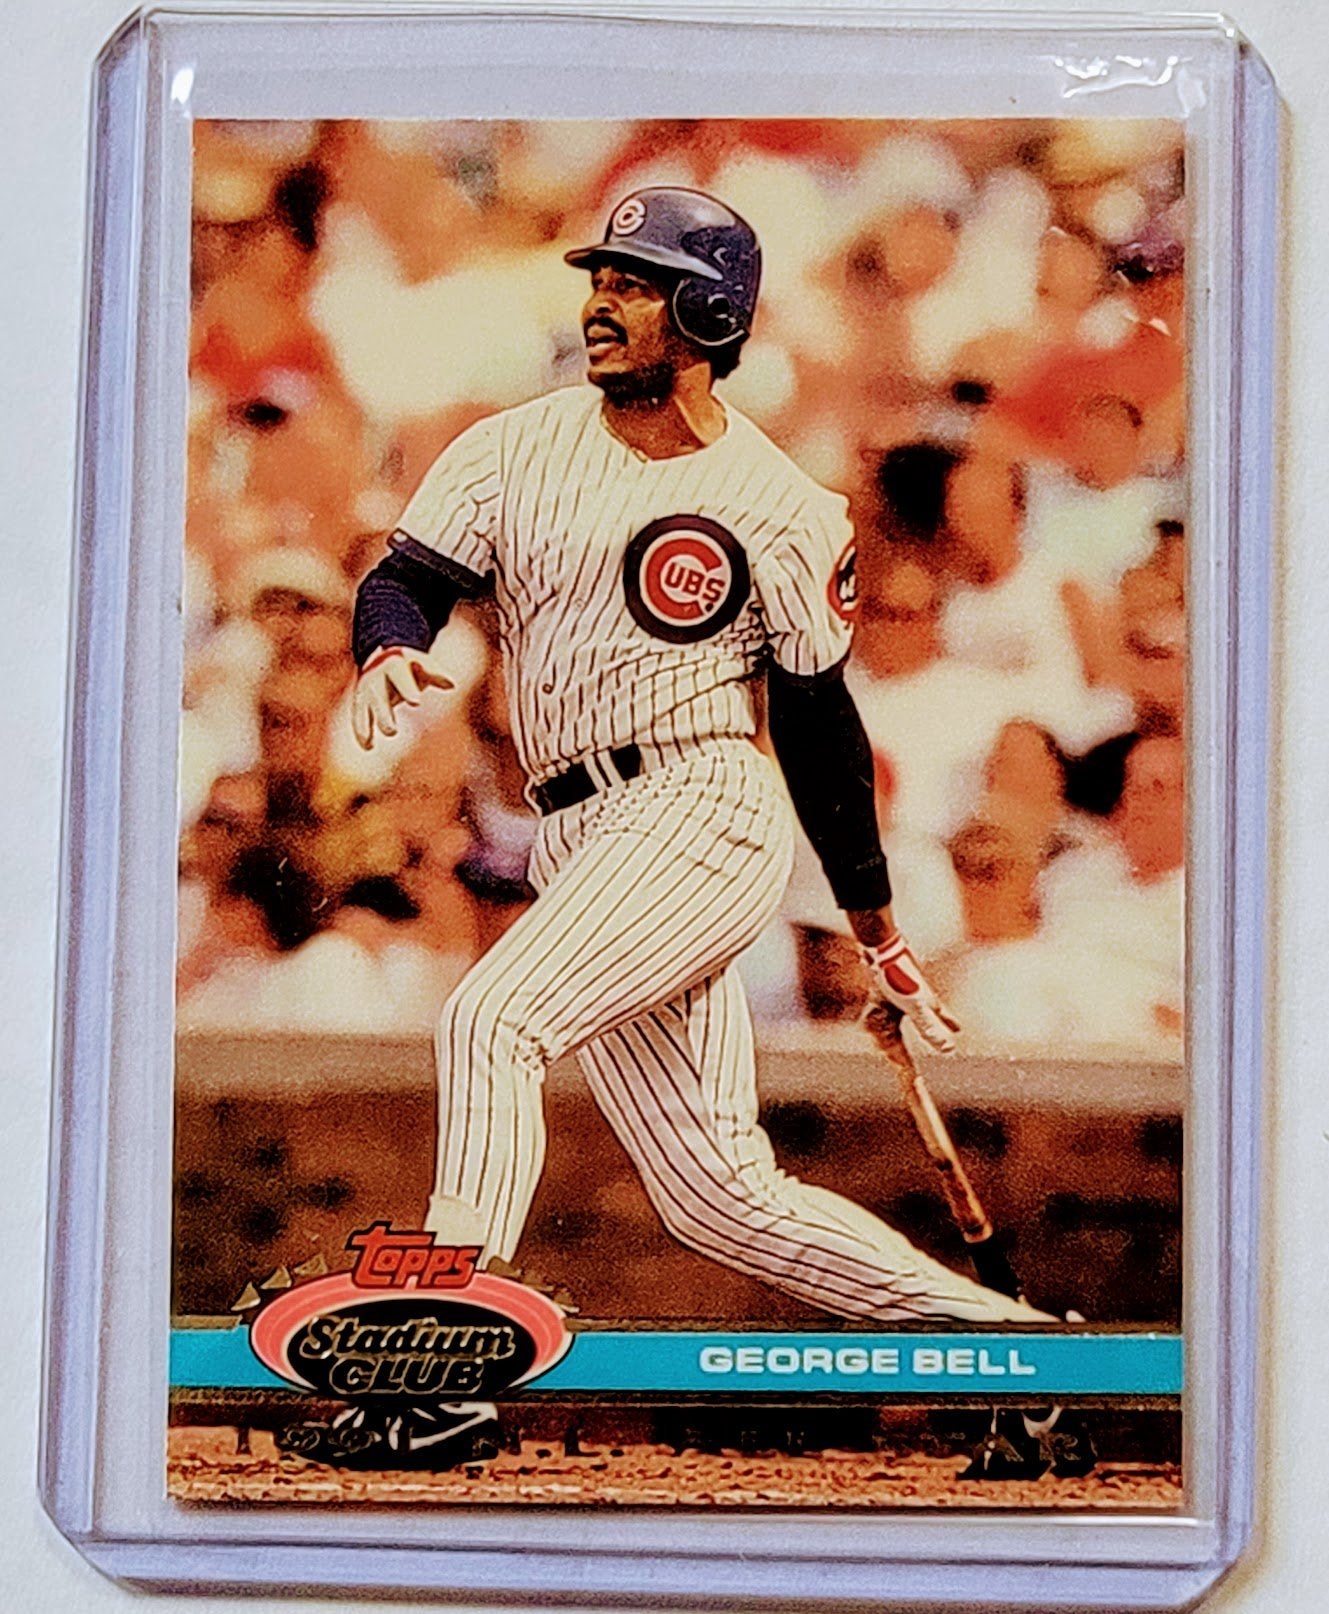 1992 Topps Stadium Club Dome George Bell 1991 All Star MLB Baseball Trading Card TPTV simple Xclusive Collectibles   